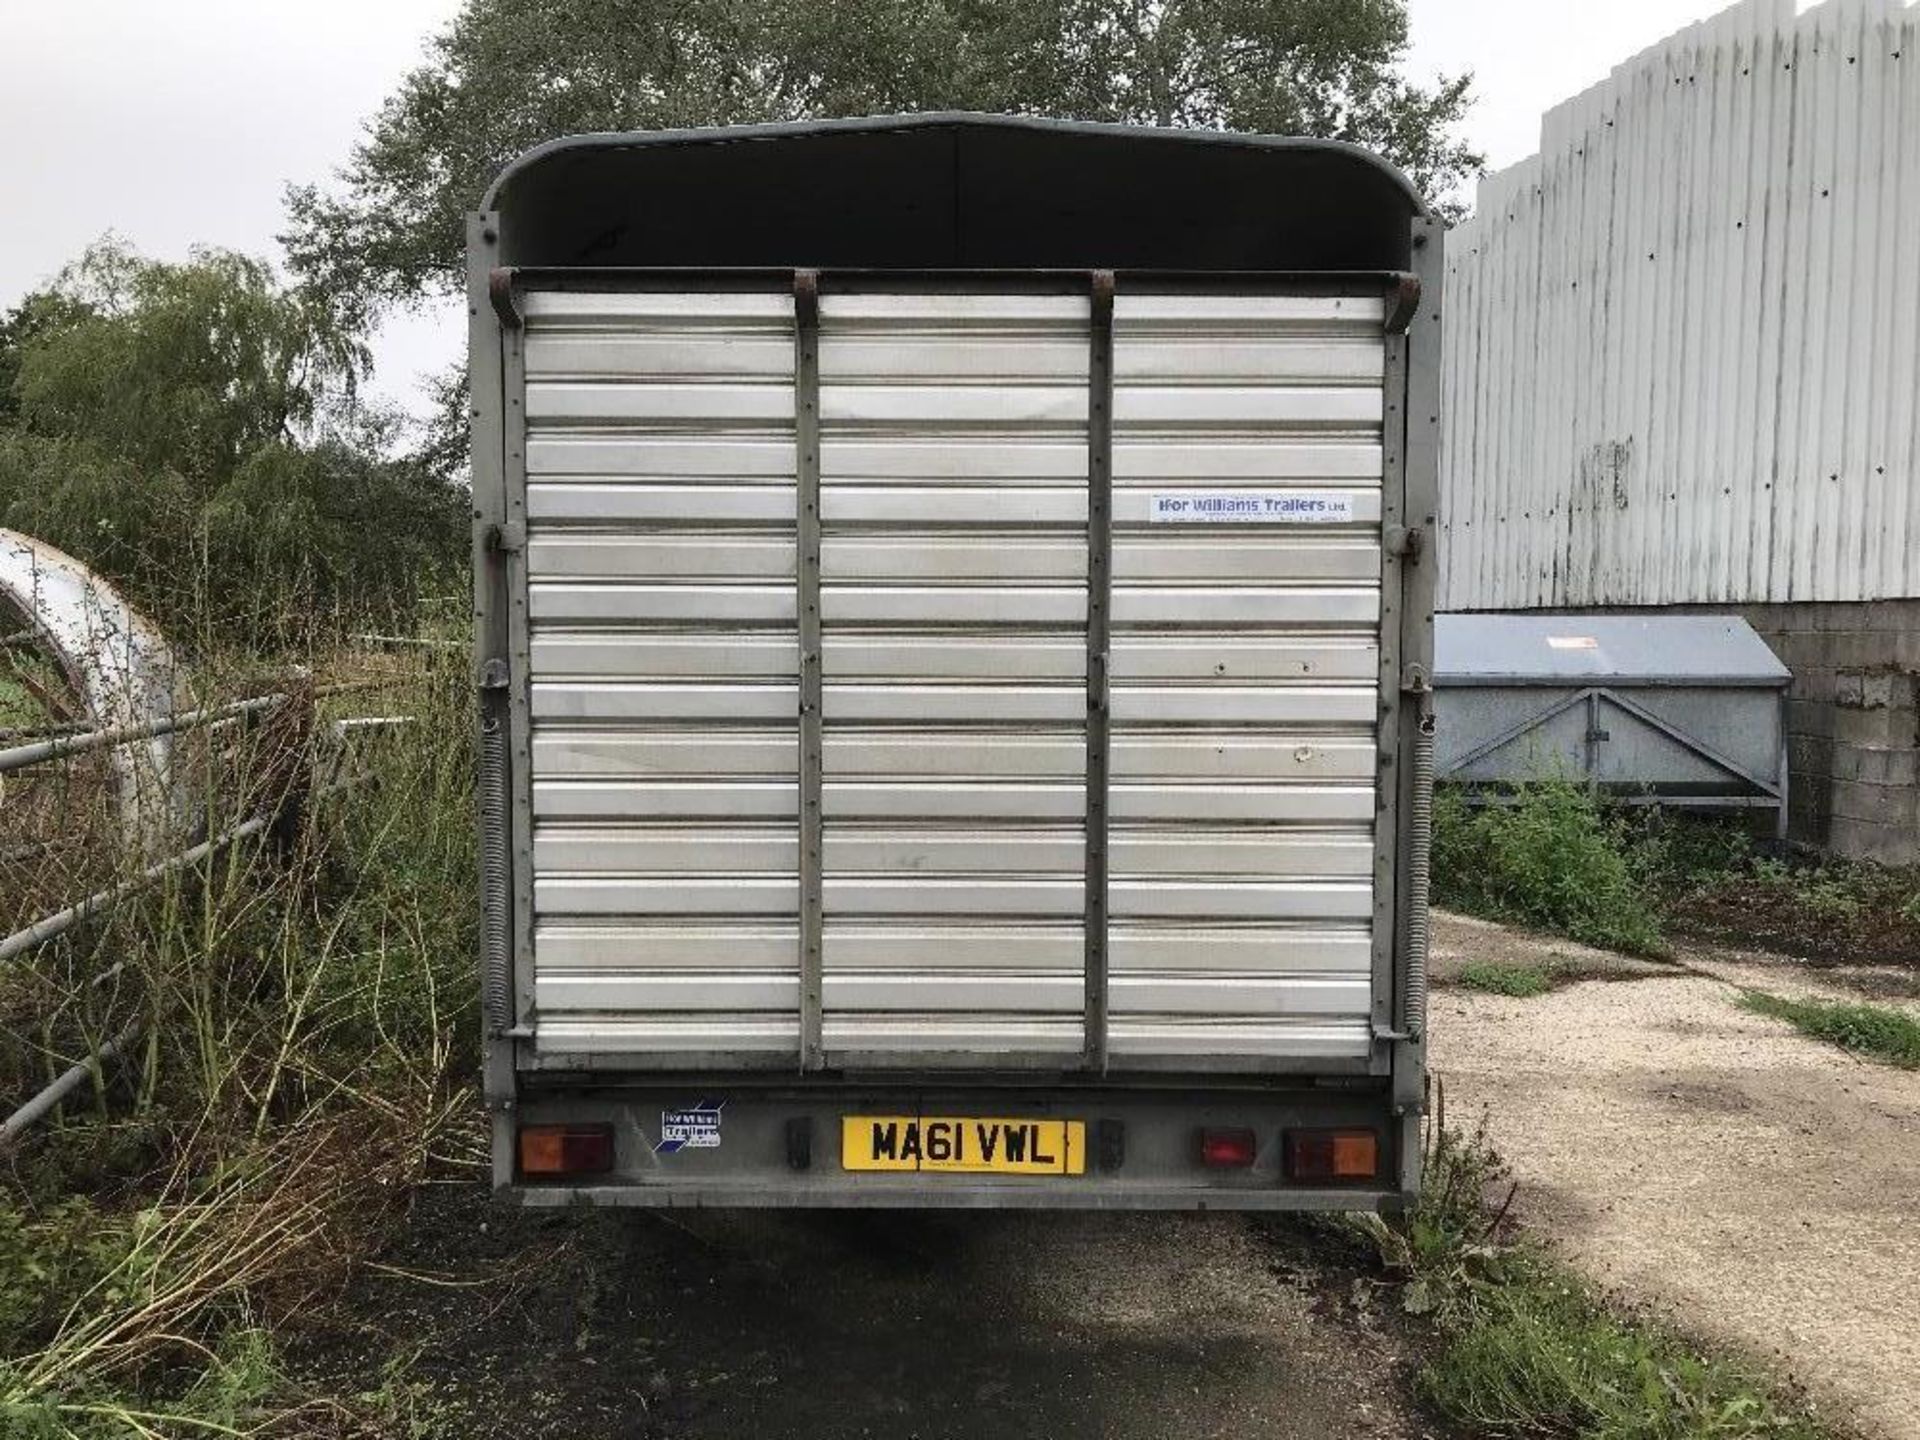 Ifor Williams 12ft x 6ft livestock trailer in very good condition. Stored near Kirby Cane, Bungay. - Image 3 of 6